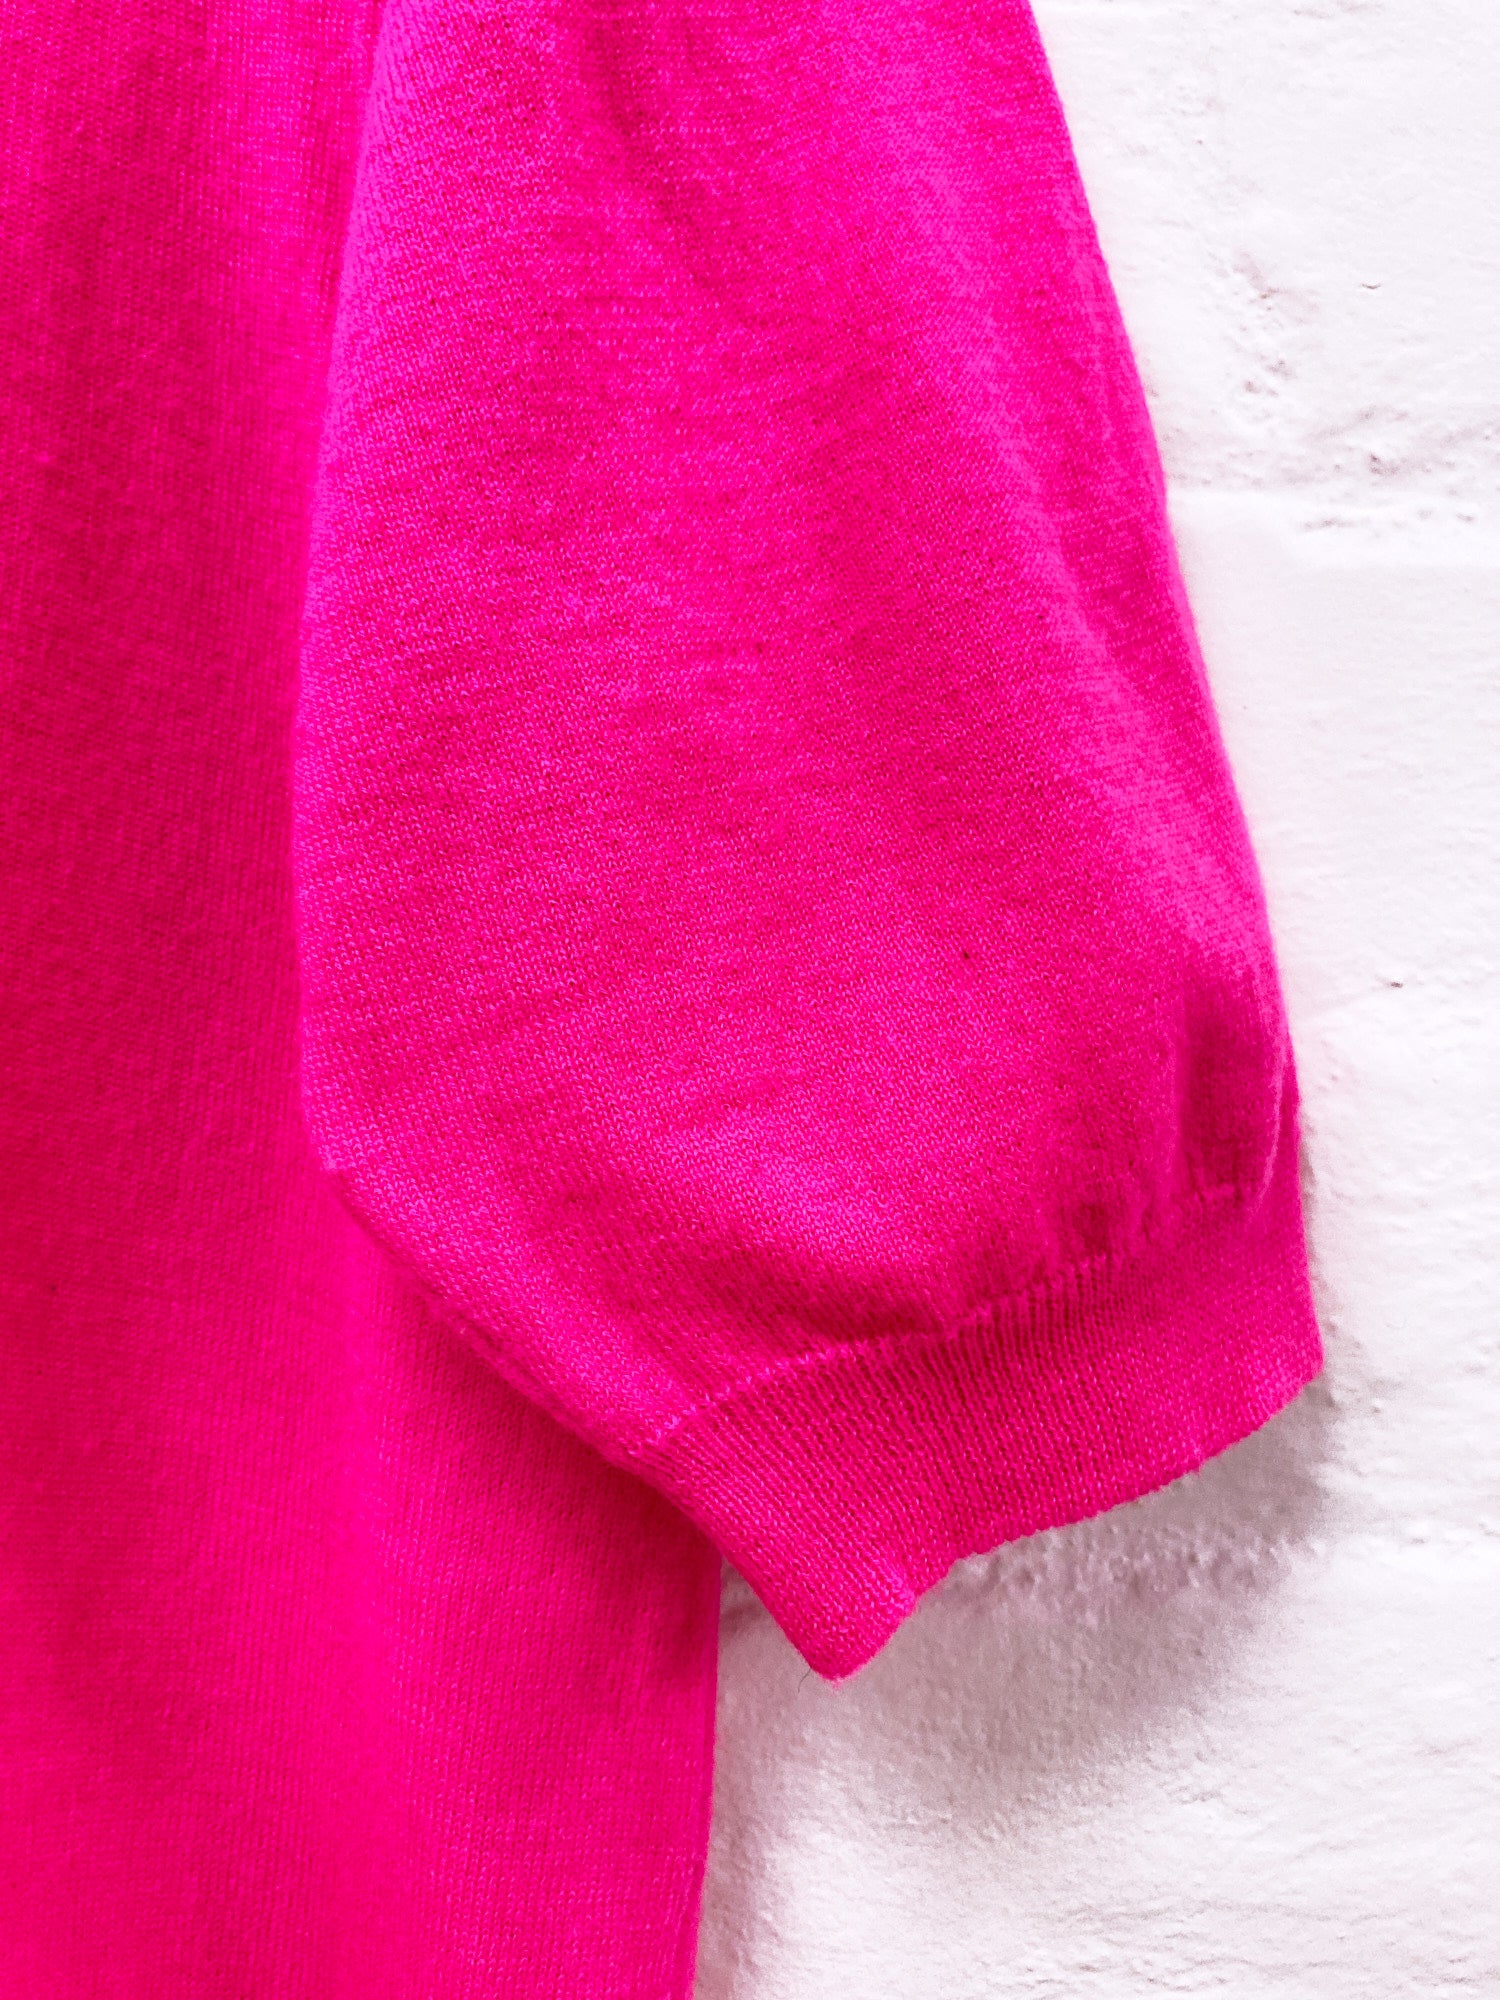 Robe de Chambre Comme des Garcons 1989 shocking pink wool short sleeve sweater